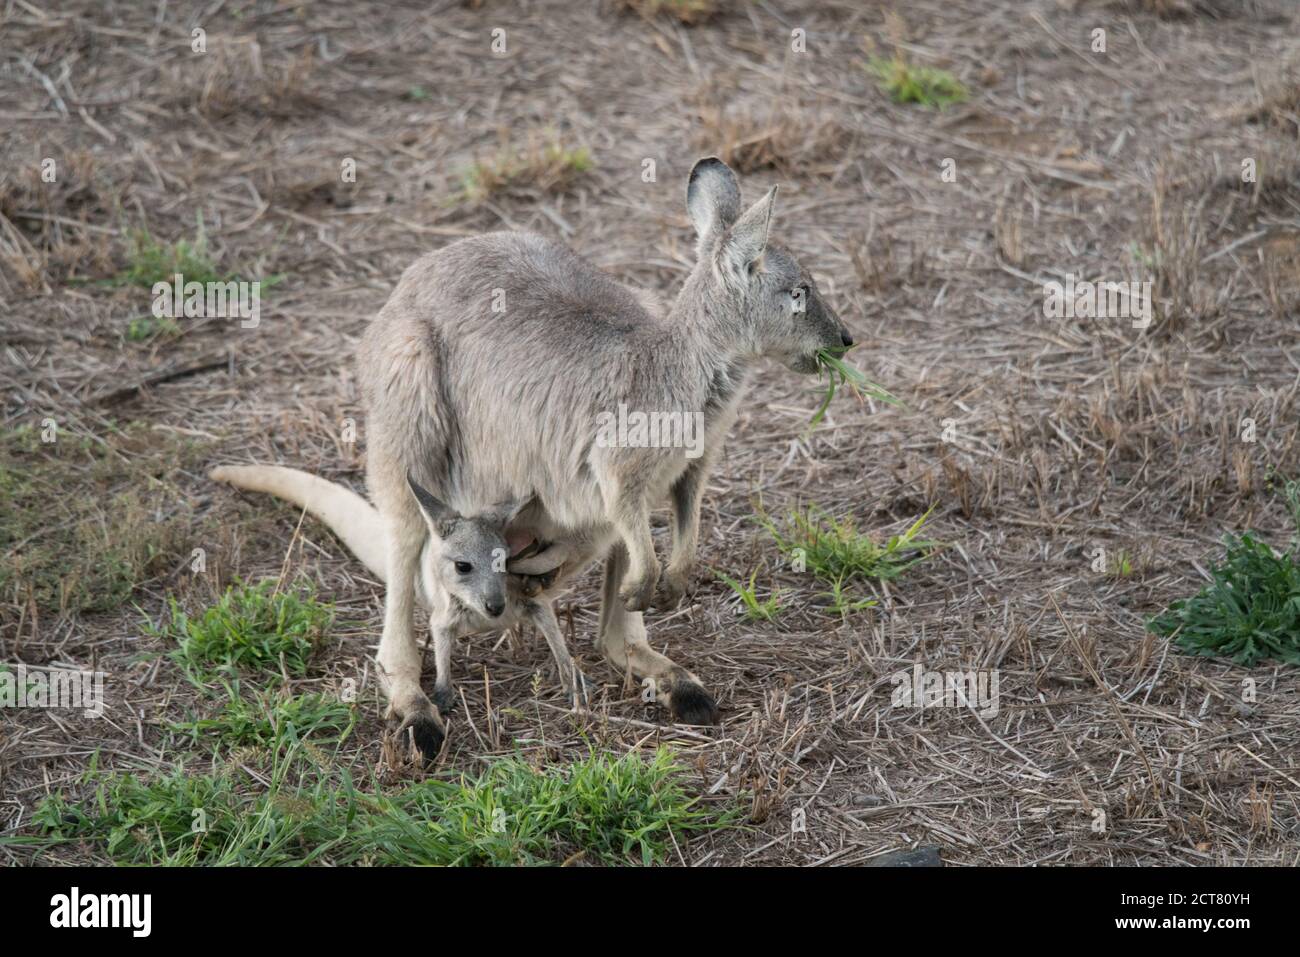 Eastern grey, Macropus giganteus, also known as great grey or Forester kangaroo eating grass with baby joey in pouch Stock Photo